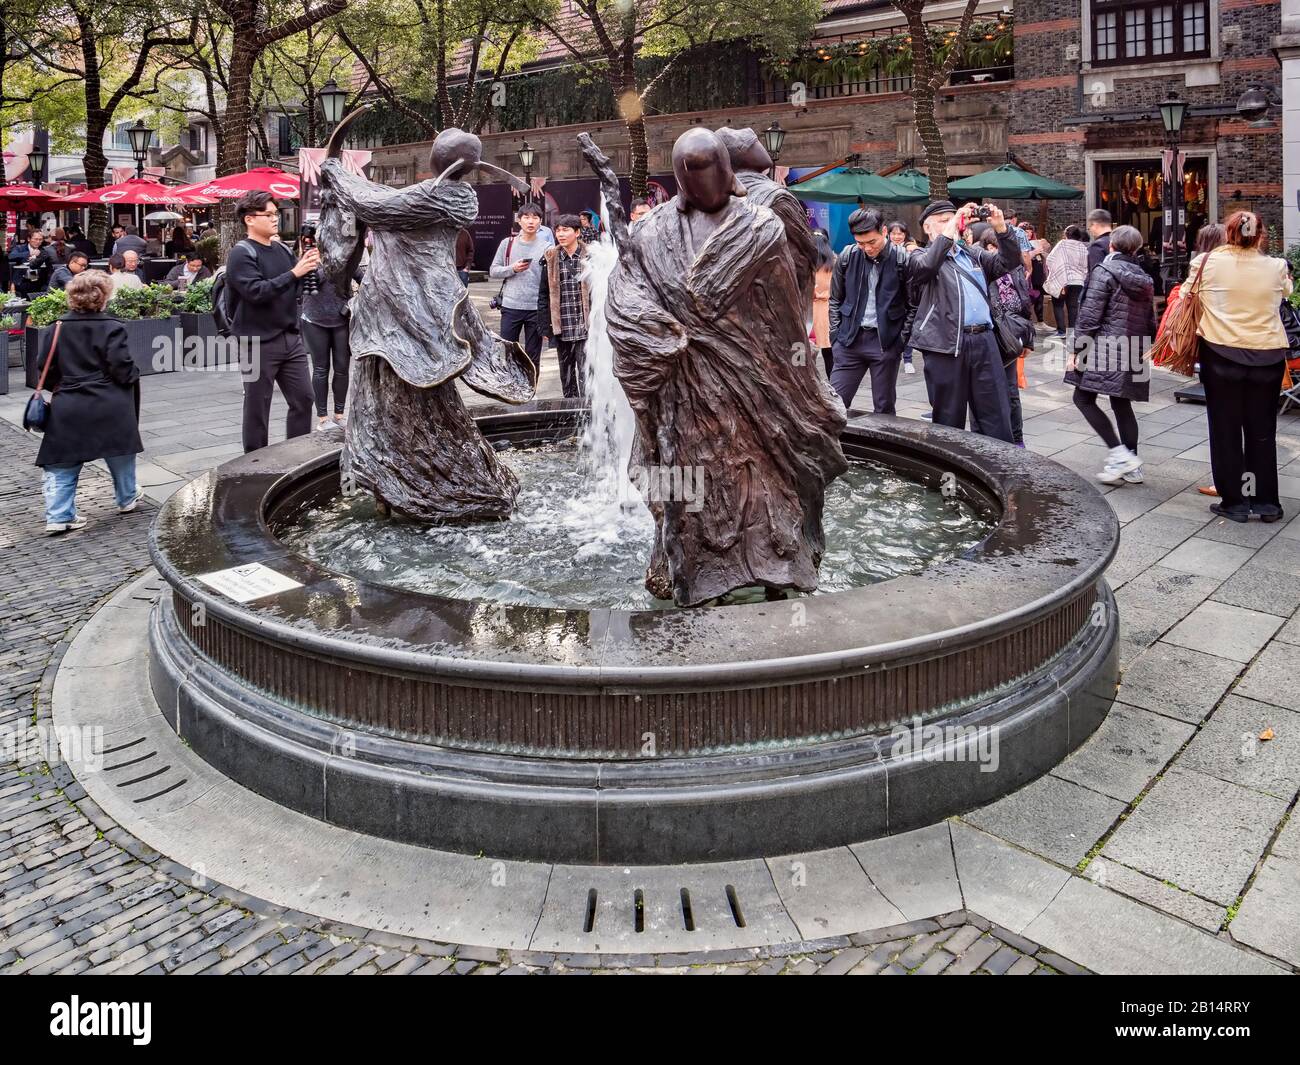 30 November 2018: Shanghai, China - Visitors around a fountain with sculptures depicting fortune, prosperity and longevity, in the Xintiandi district Stock Photo